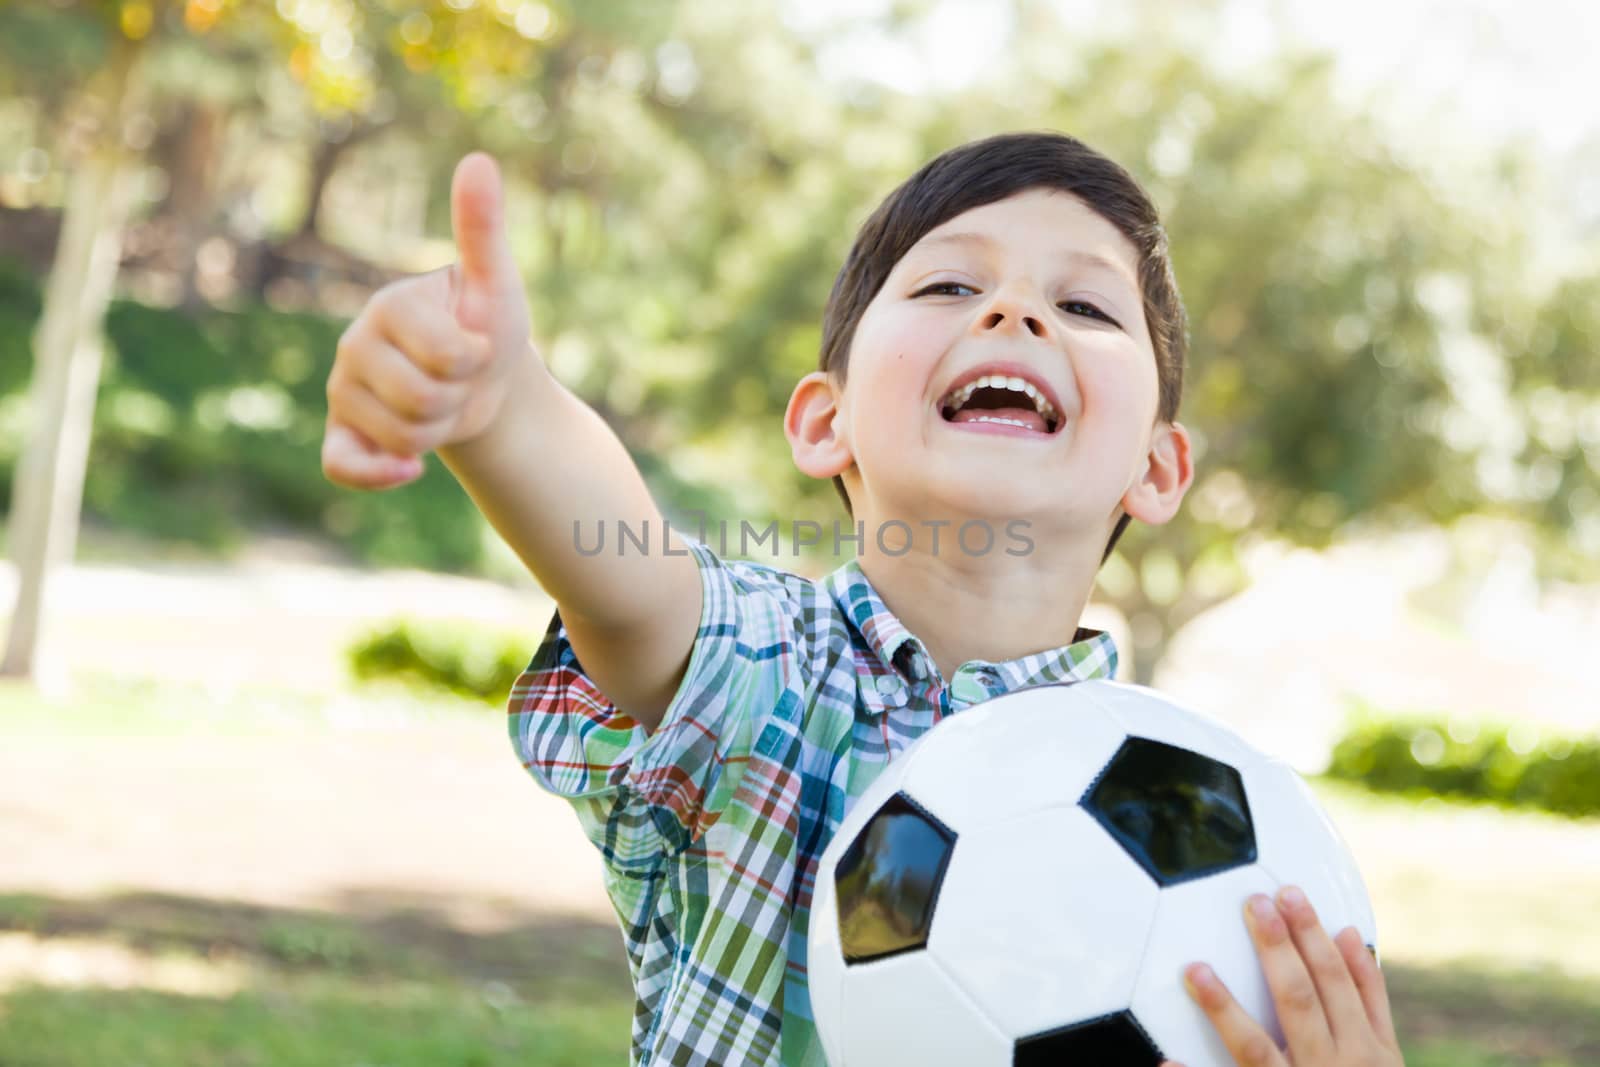 Cute Young Boy Playing with Soccer Ball and Thumbs Up Outdoors in the Park.